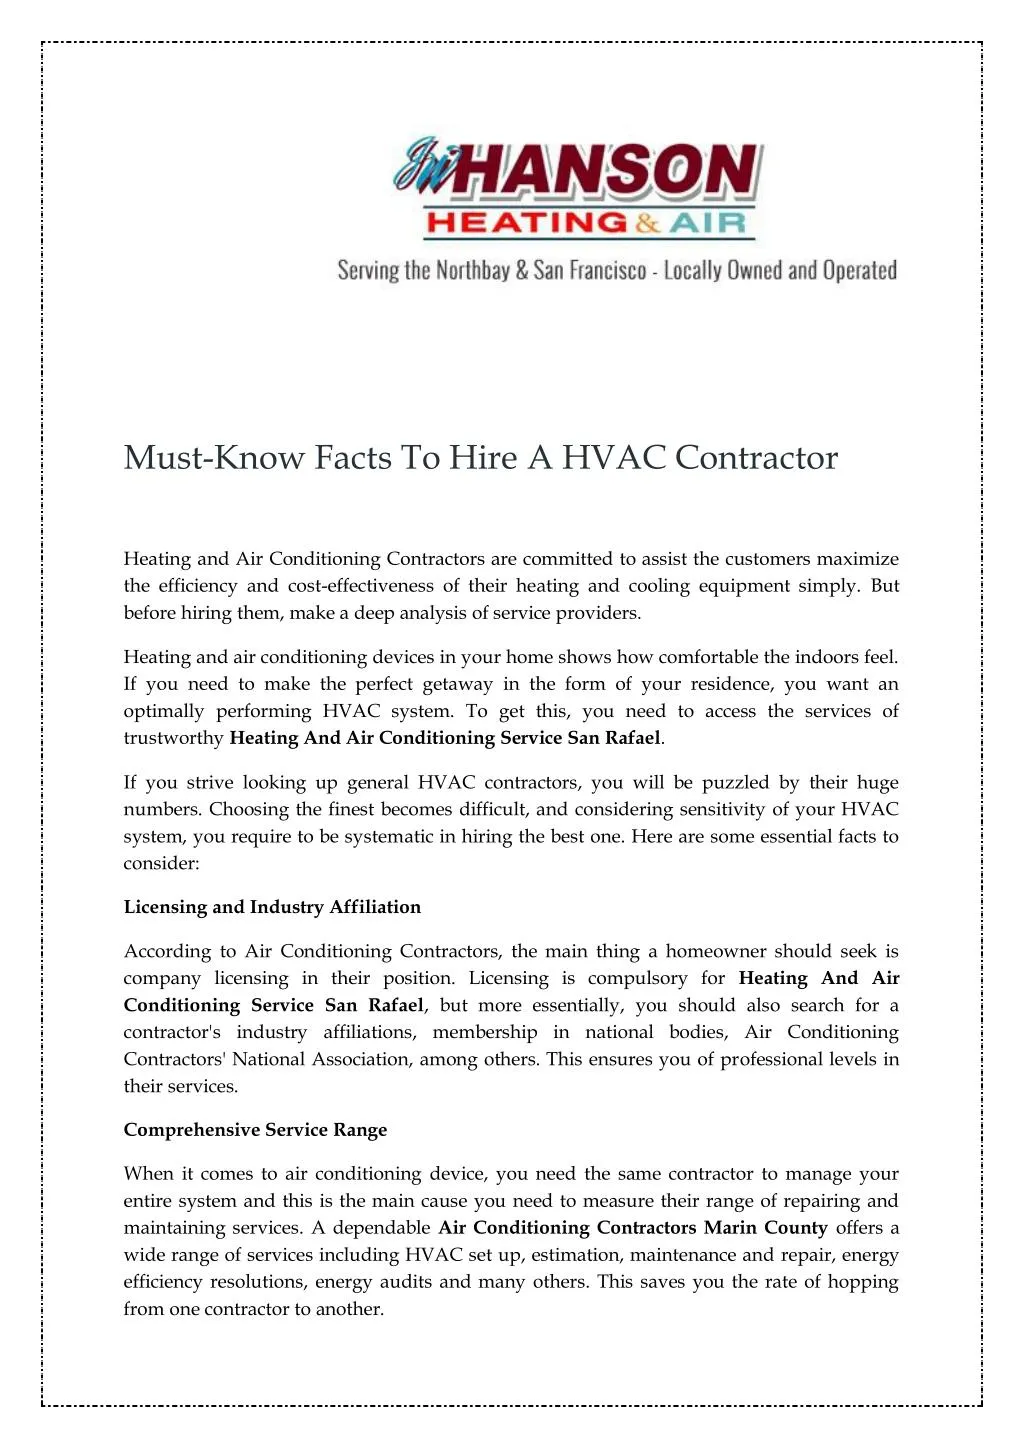 must know facts to hire a hvac contractor